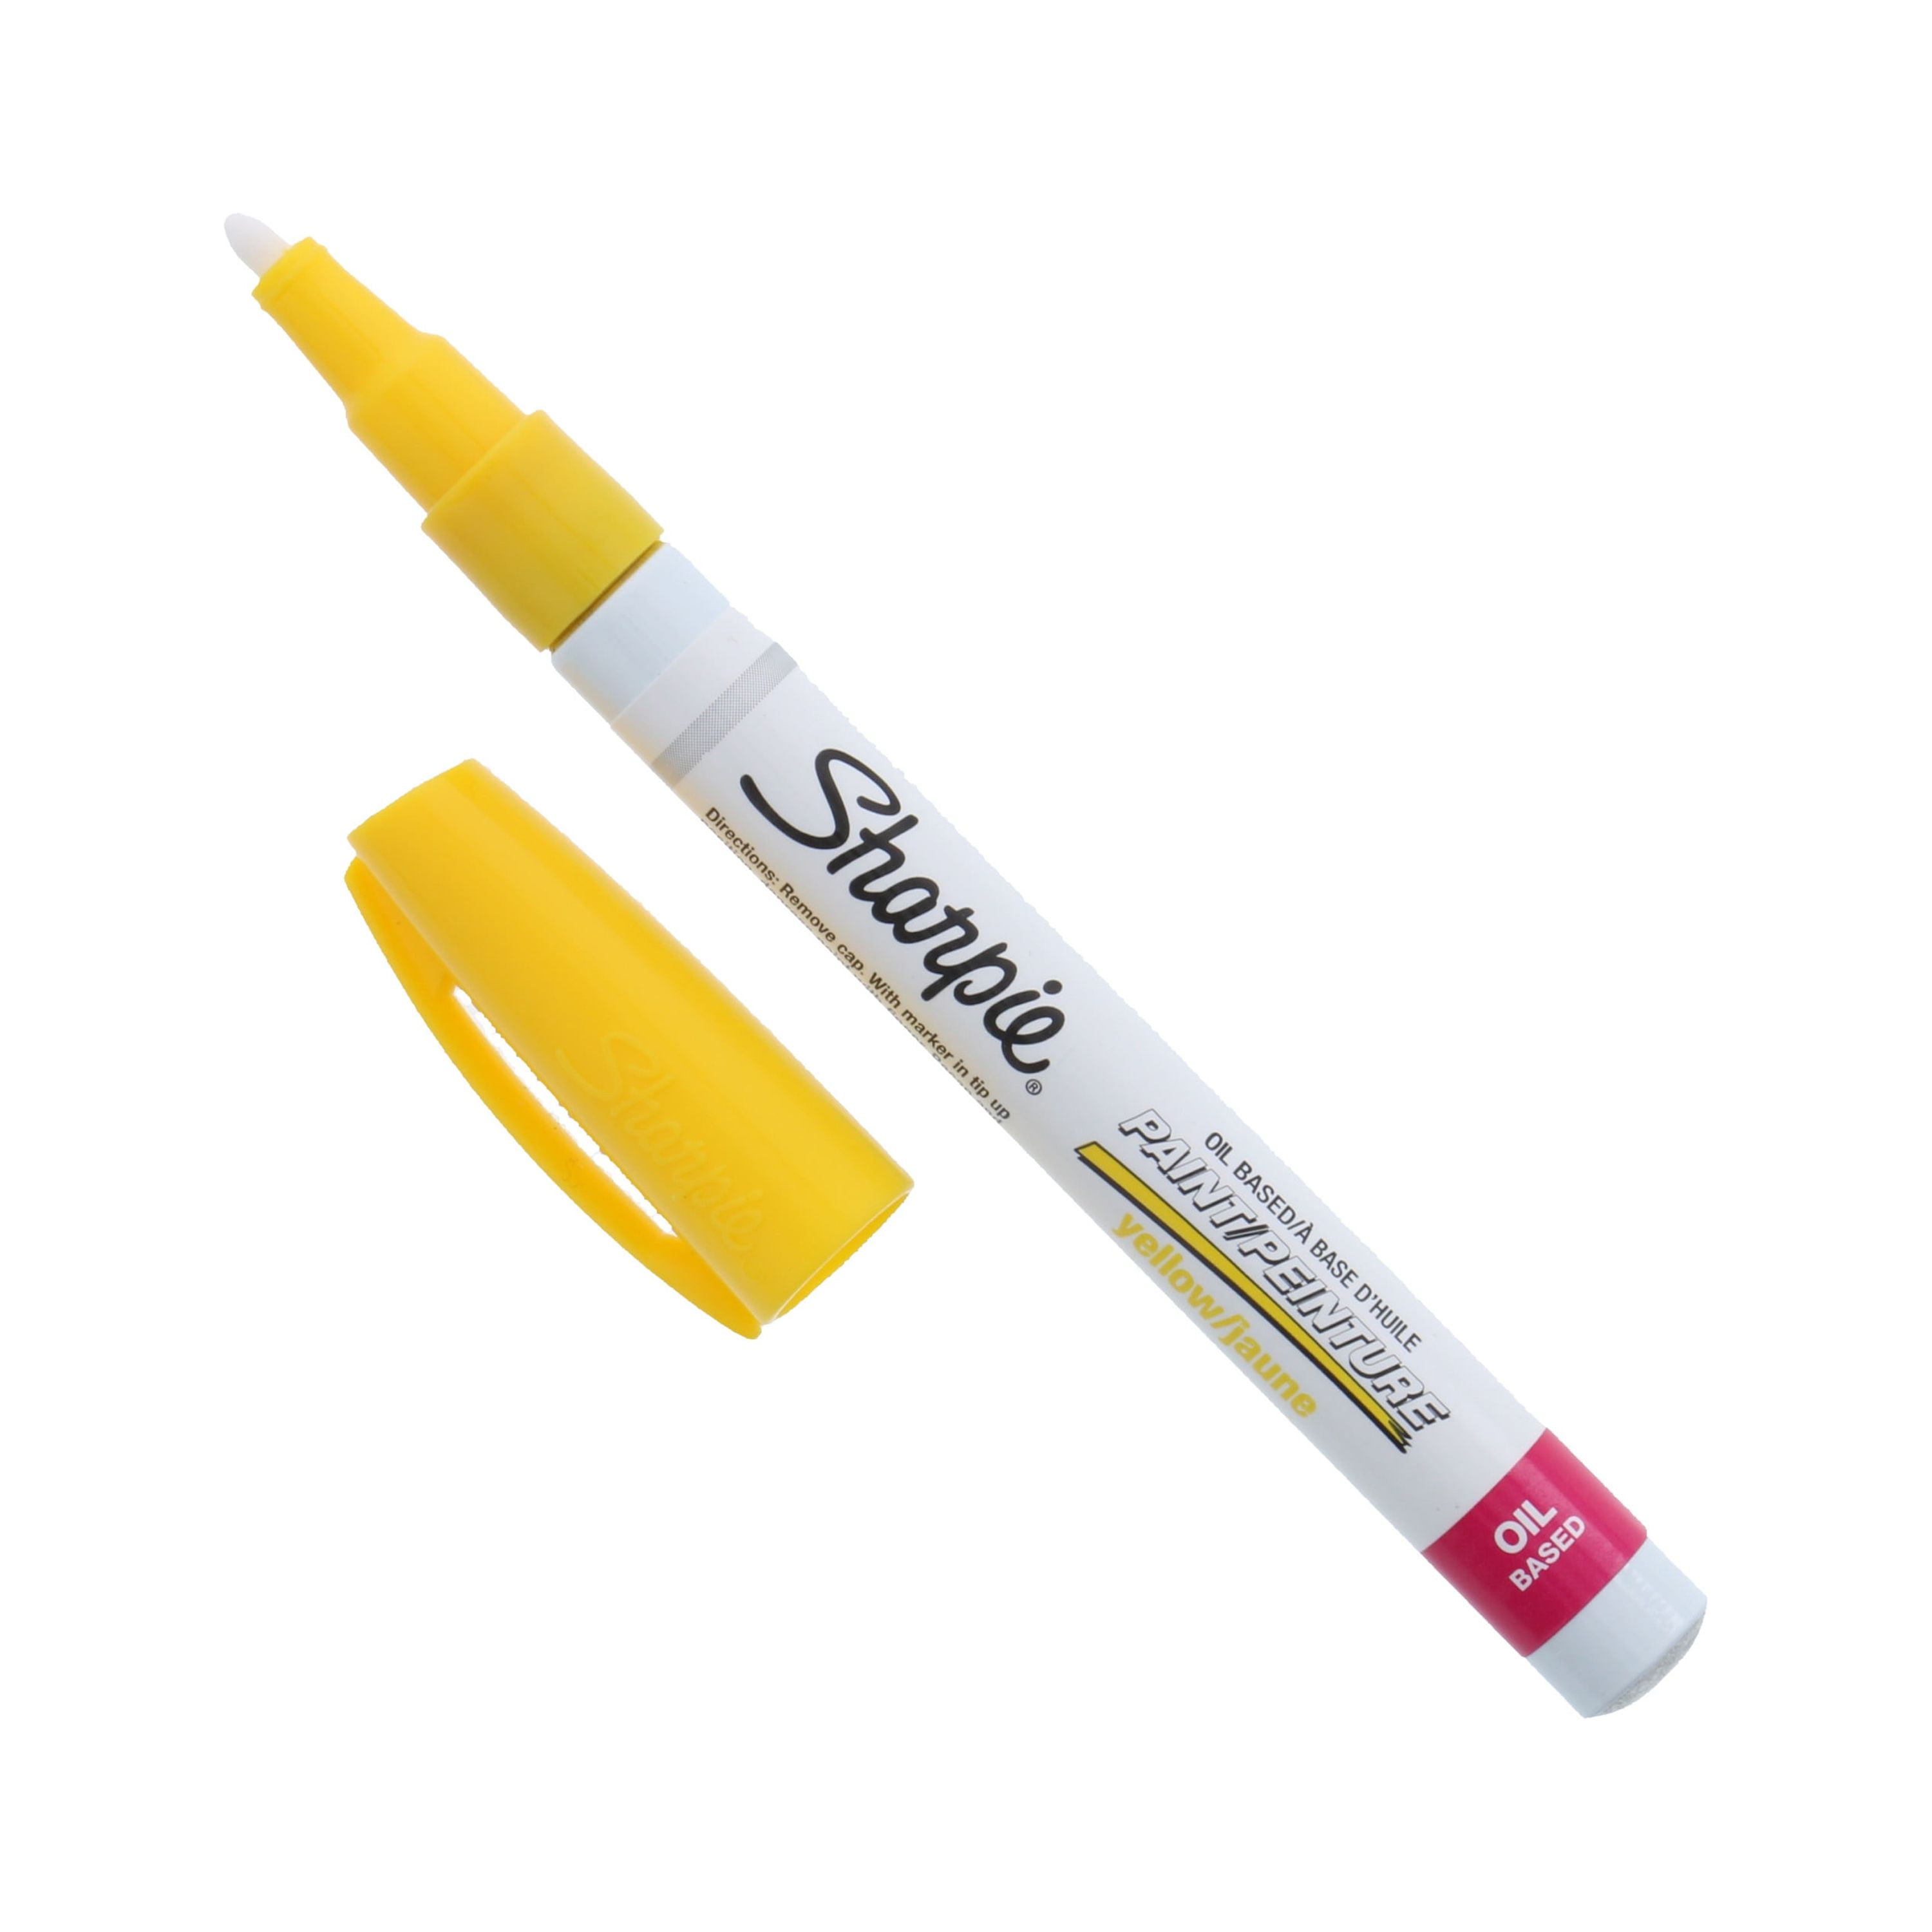 SHARPIE Sanford Oil-Based Paint Marker, Medium Point, Yellow, 1 Count -  Great for Rock Painting (35554)